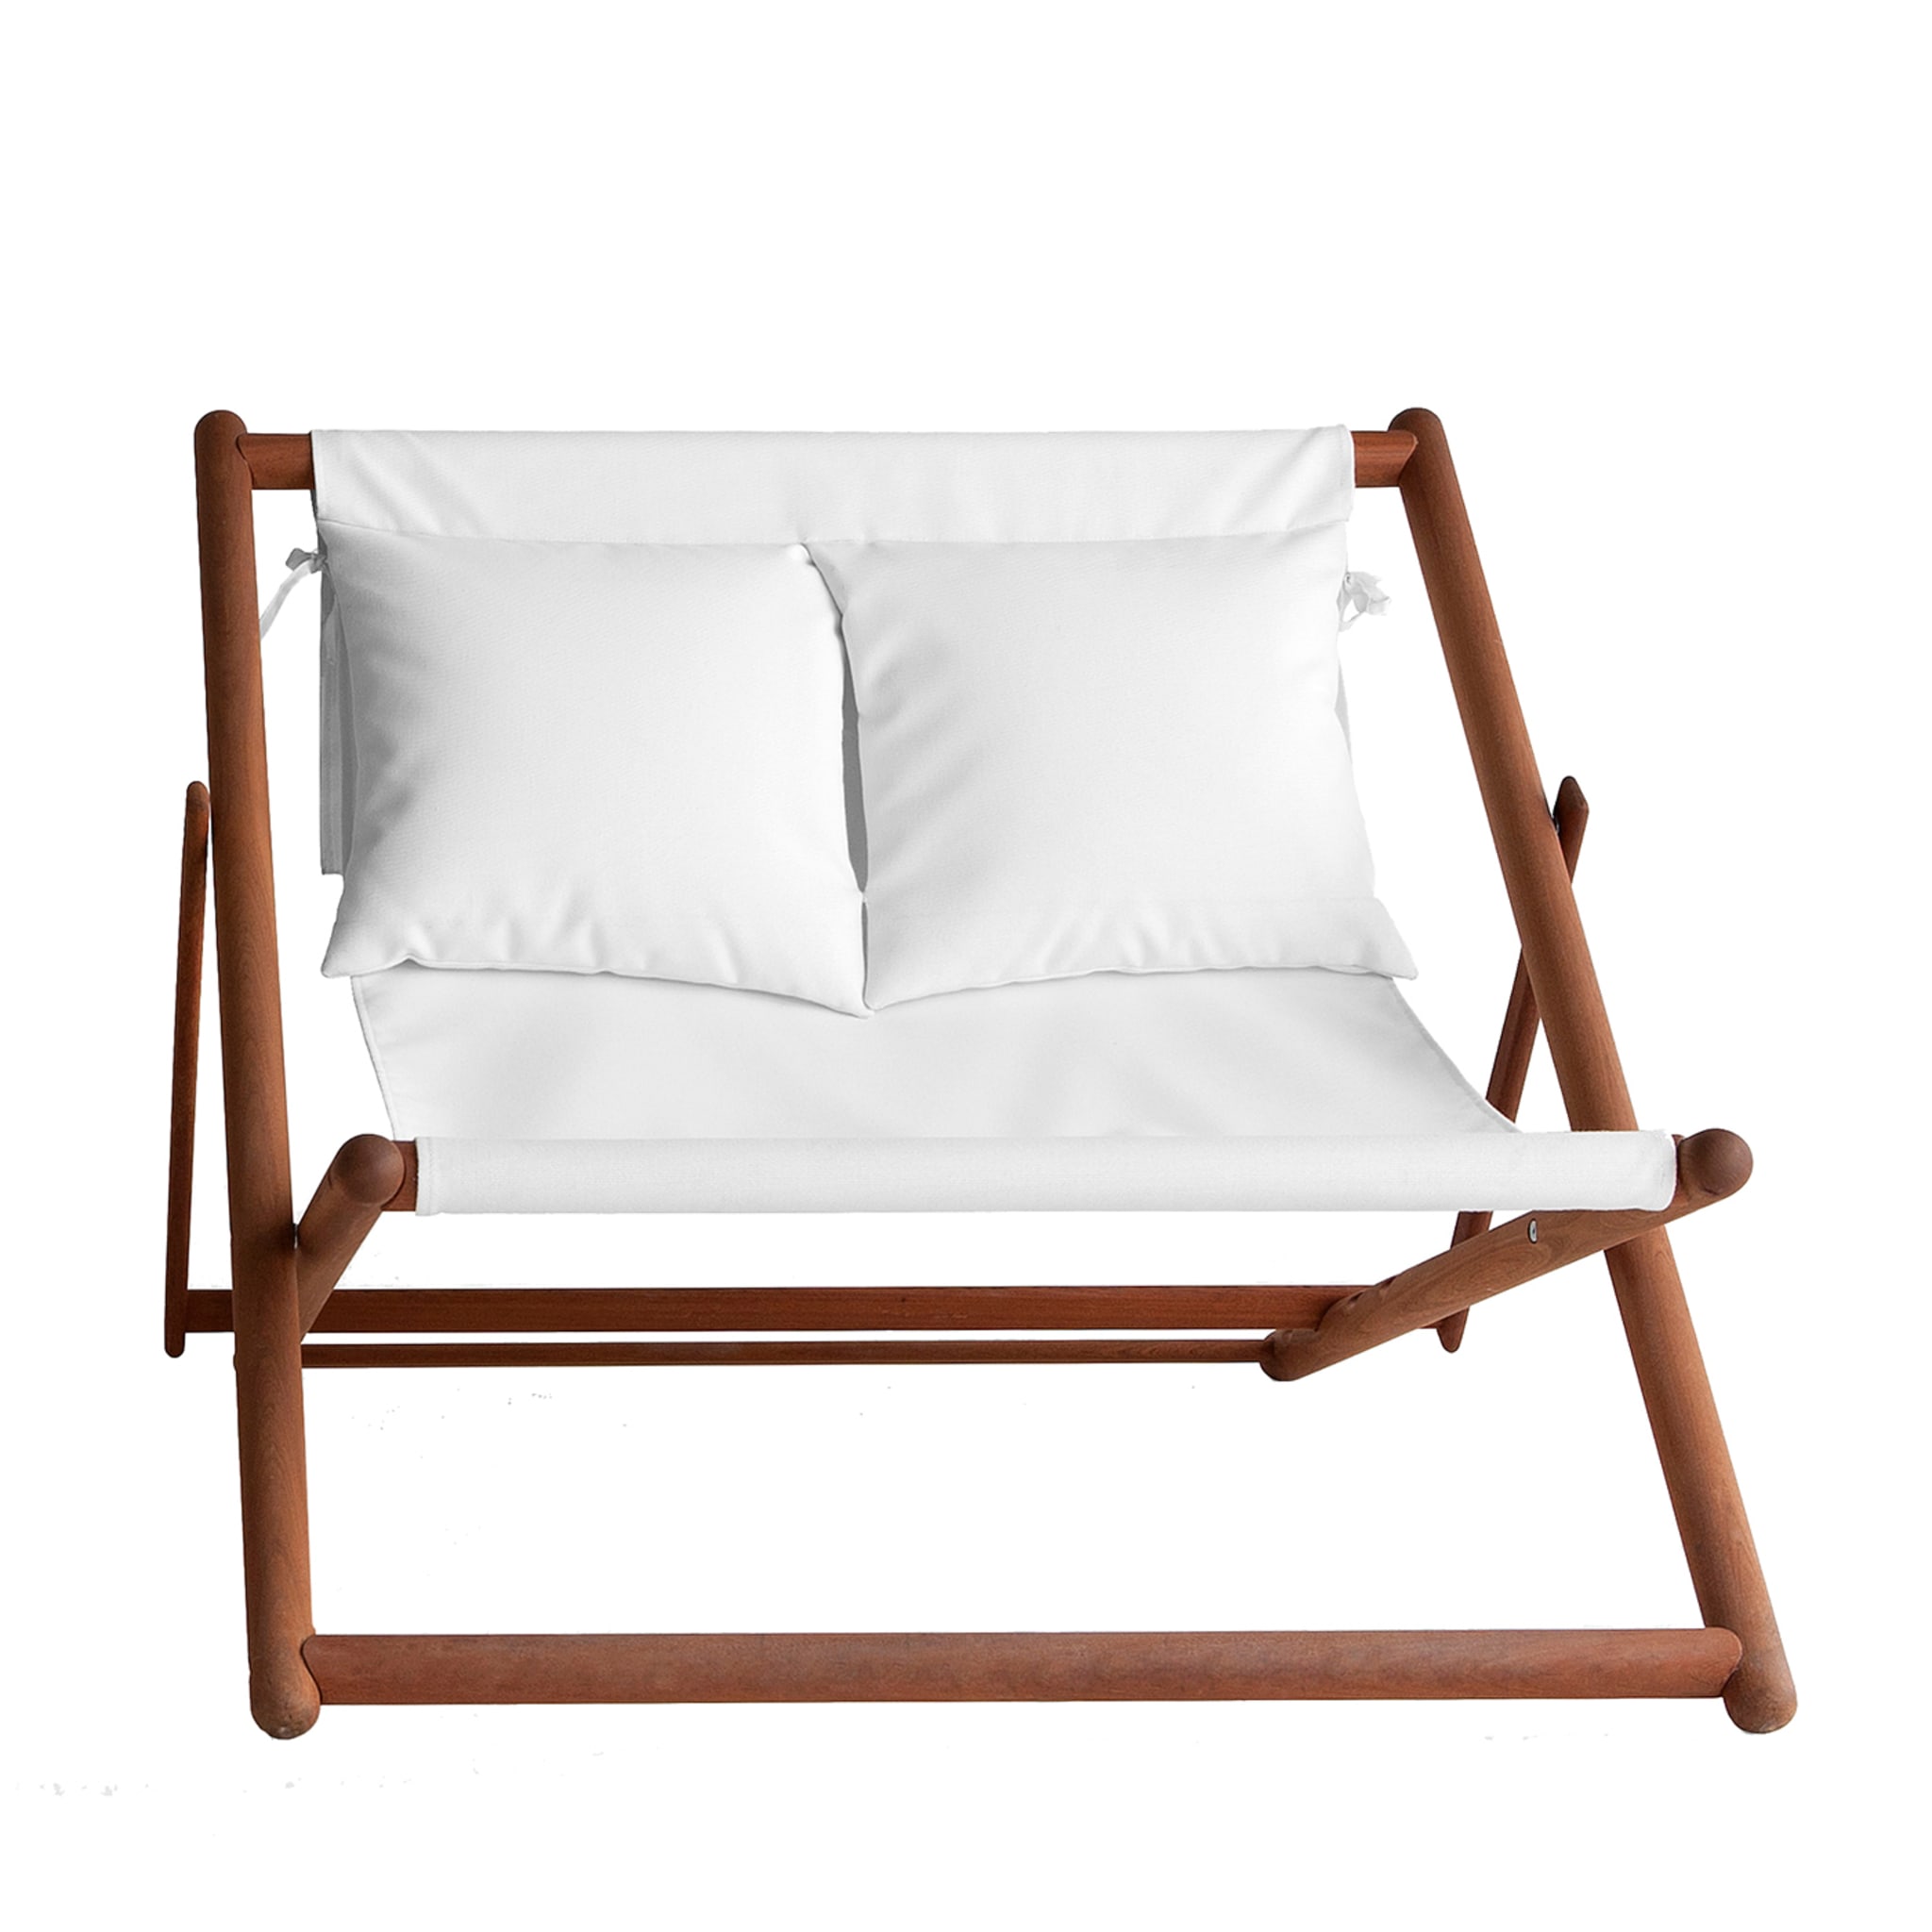 Paraggi 2-Seater Beach Chair by Ludovica + Roberto Palomba - Main view